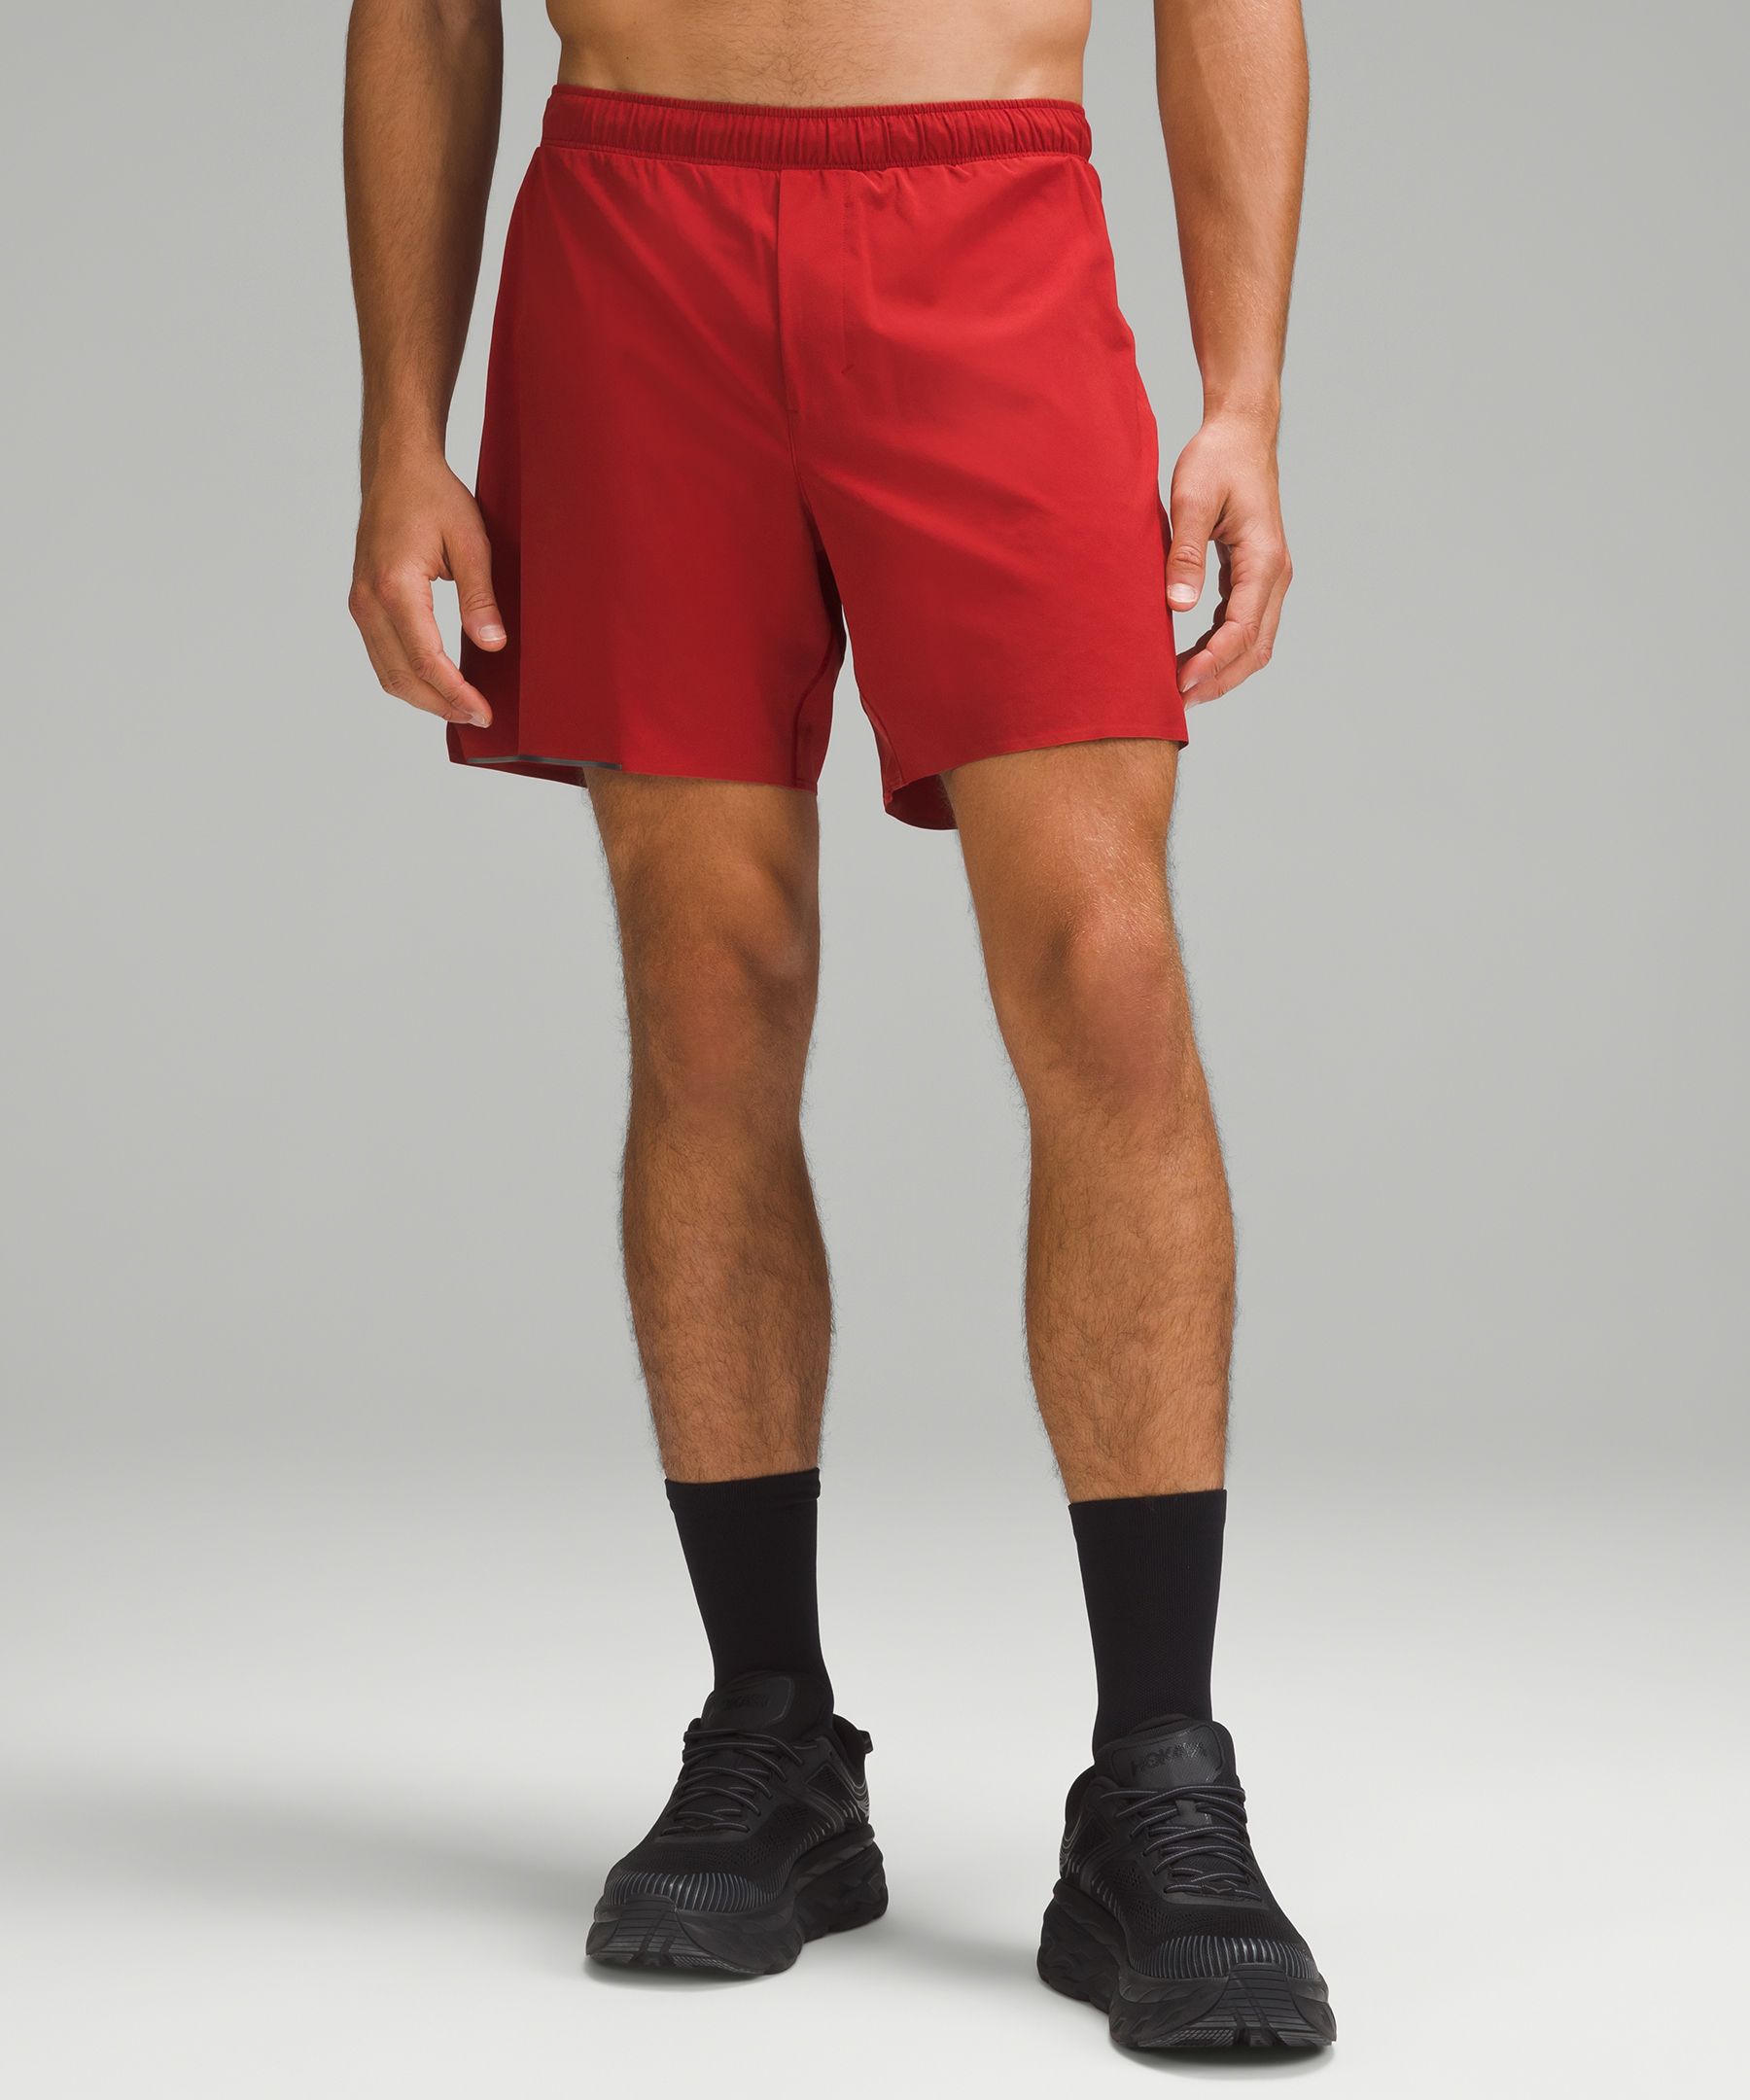 Lululemon Surge Lined Shorts 6" In Sport Red